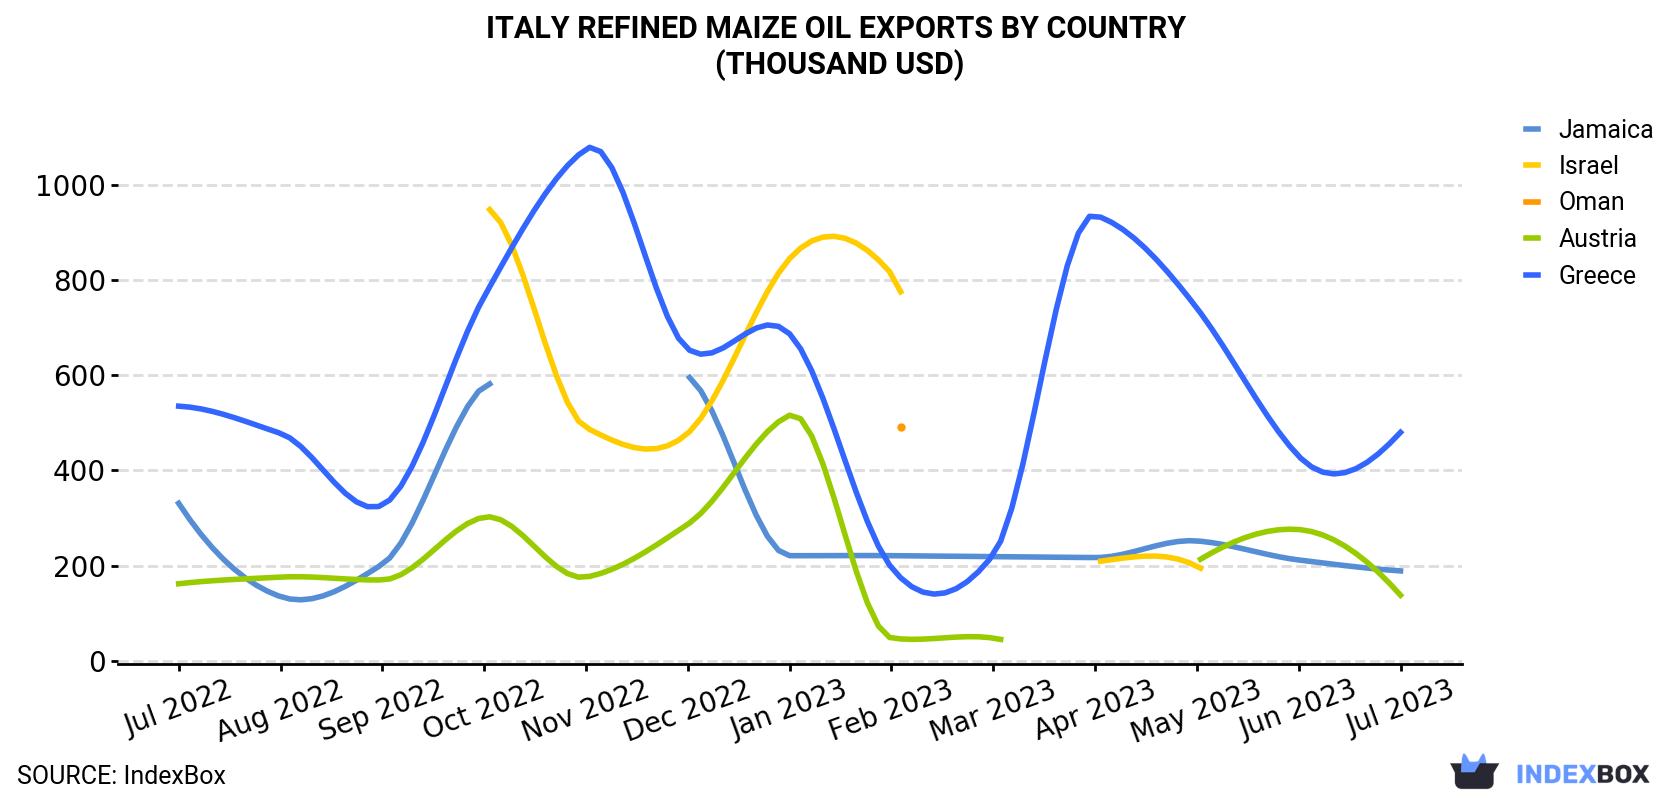 Italy Refined Maize Oil Exports By Country (Thousand USD)